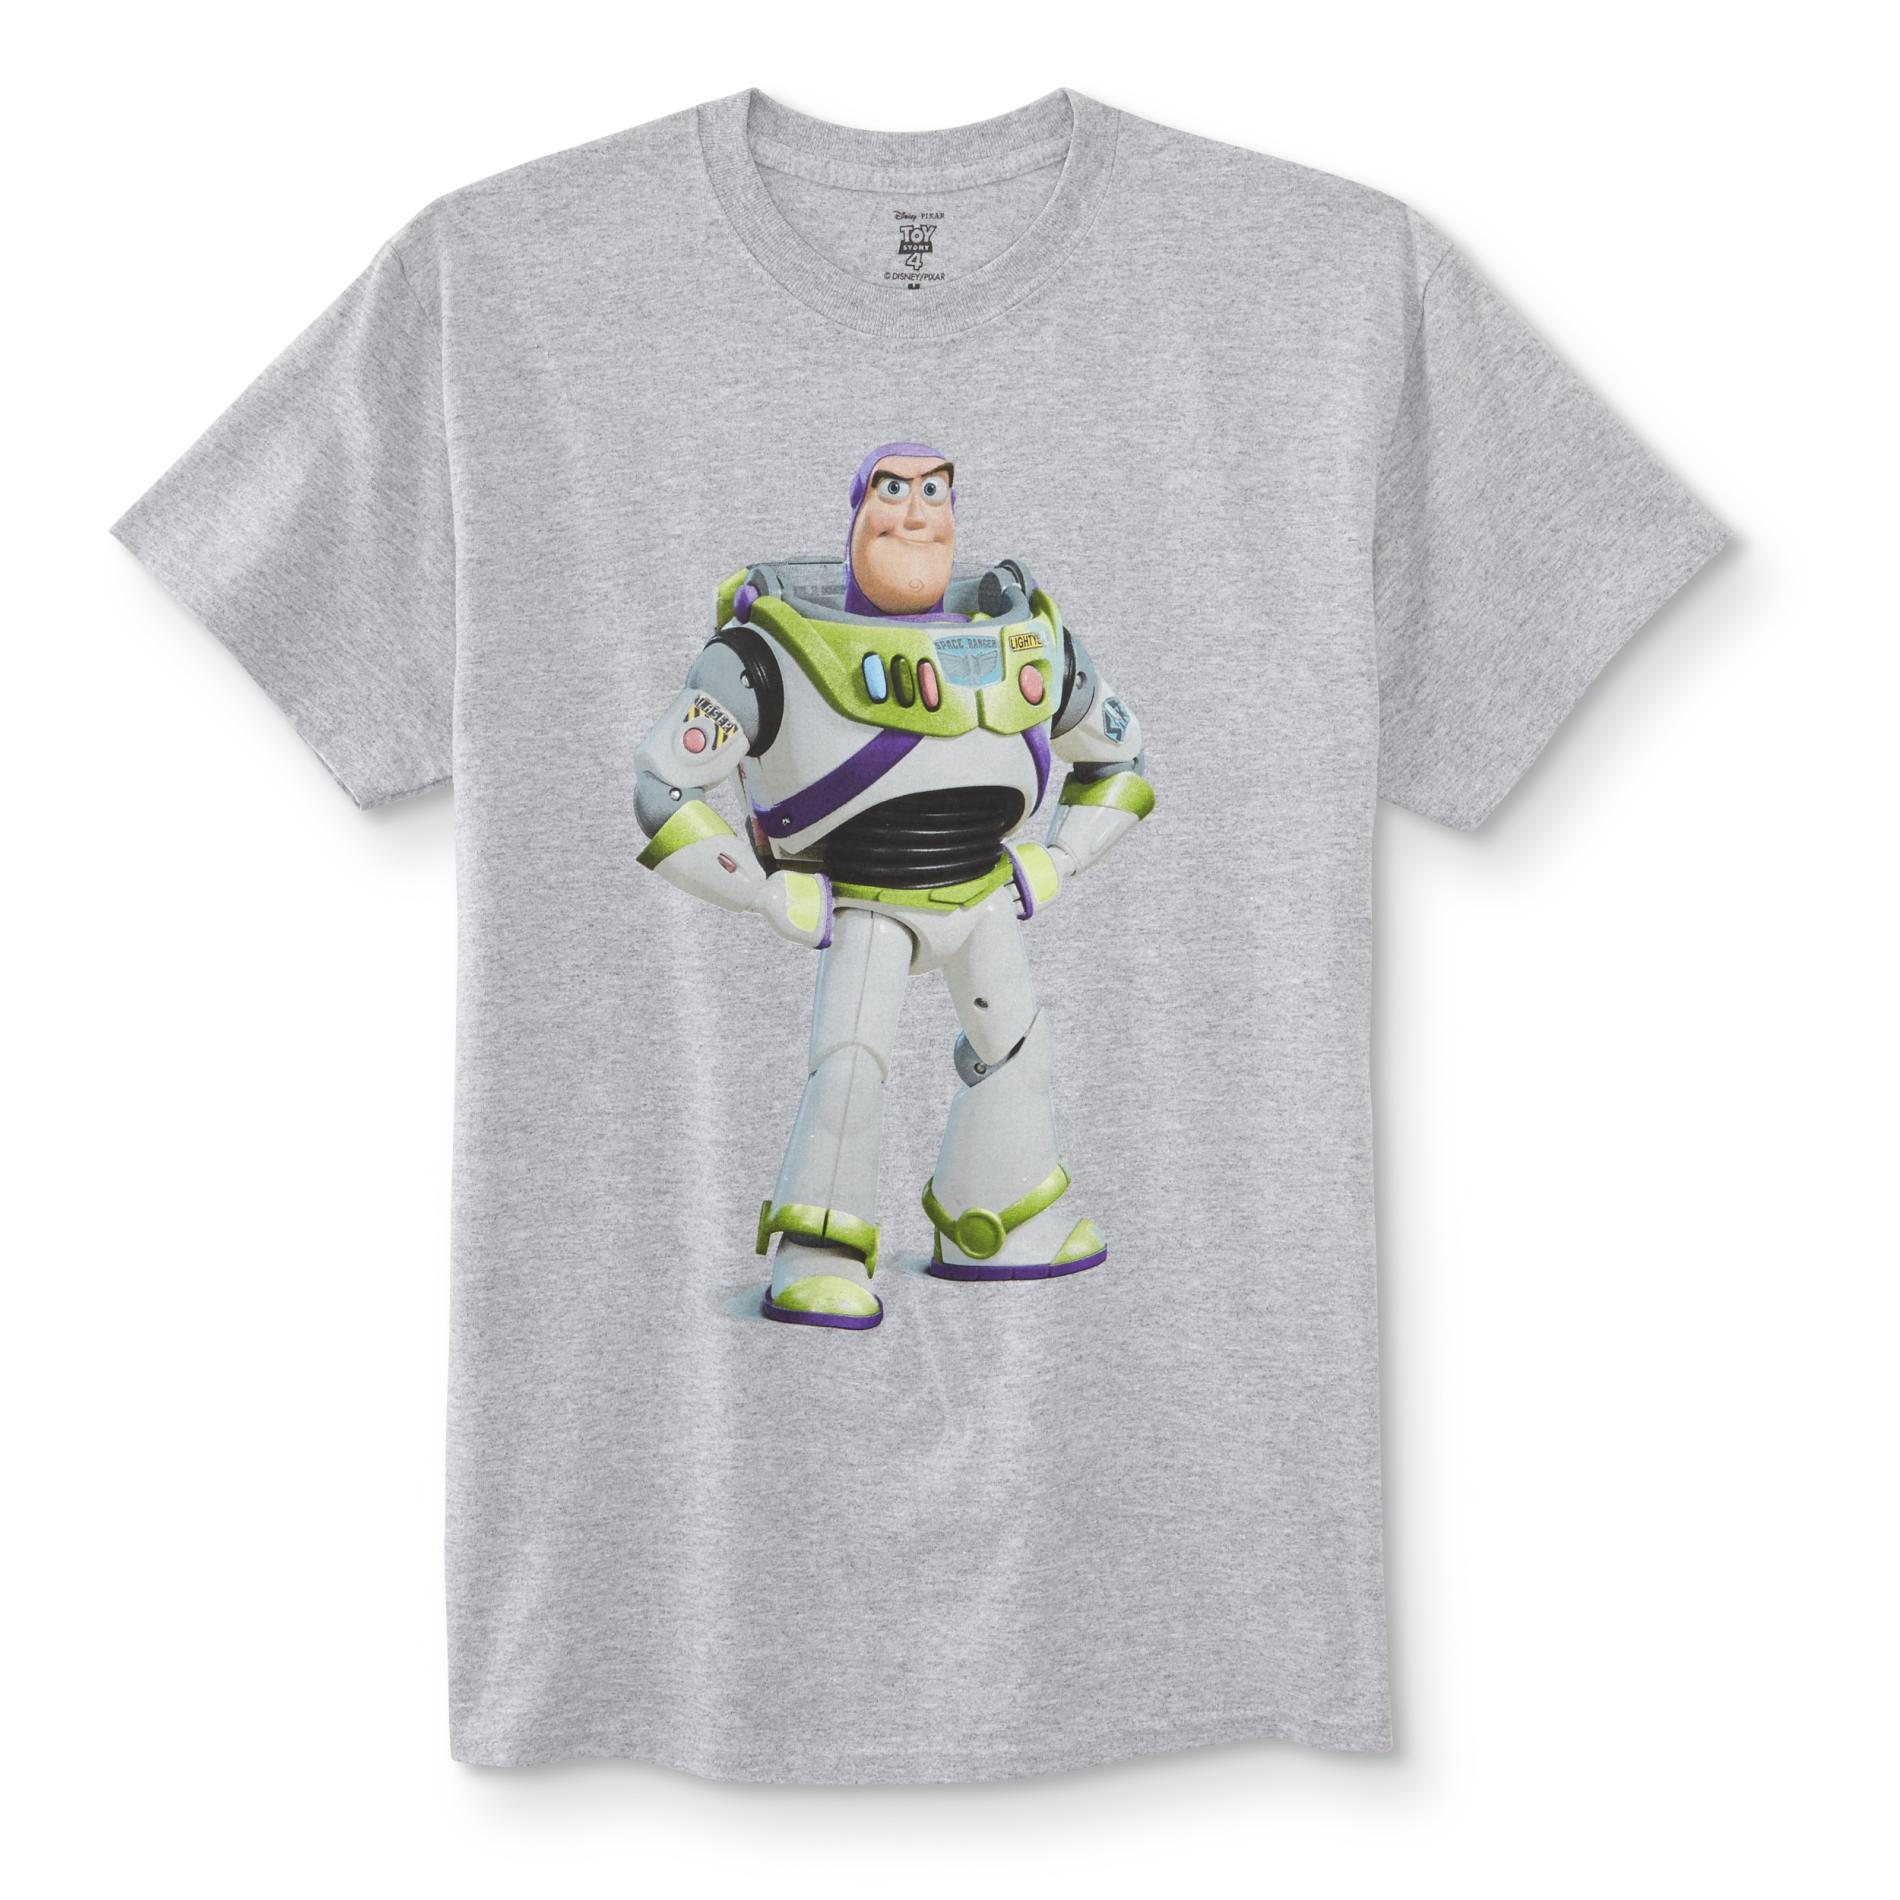 Toy Story Young Men's Graphic T-Shirt - Buzz Lightyear